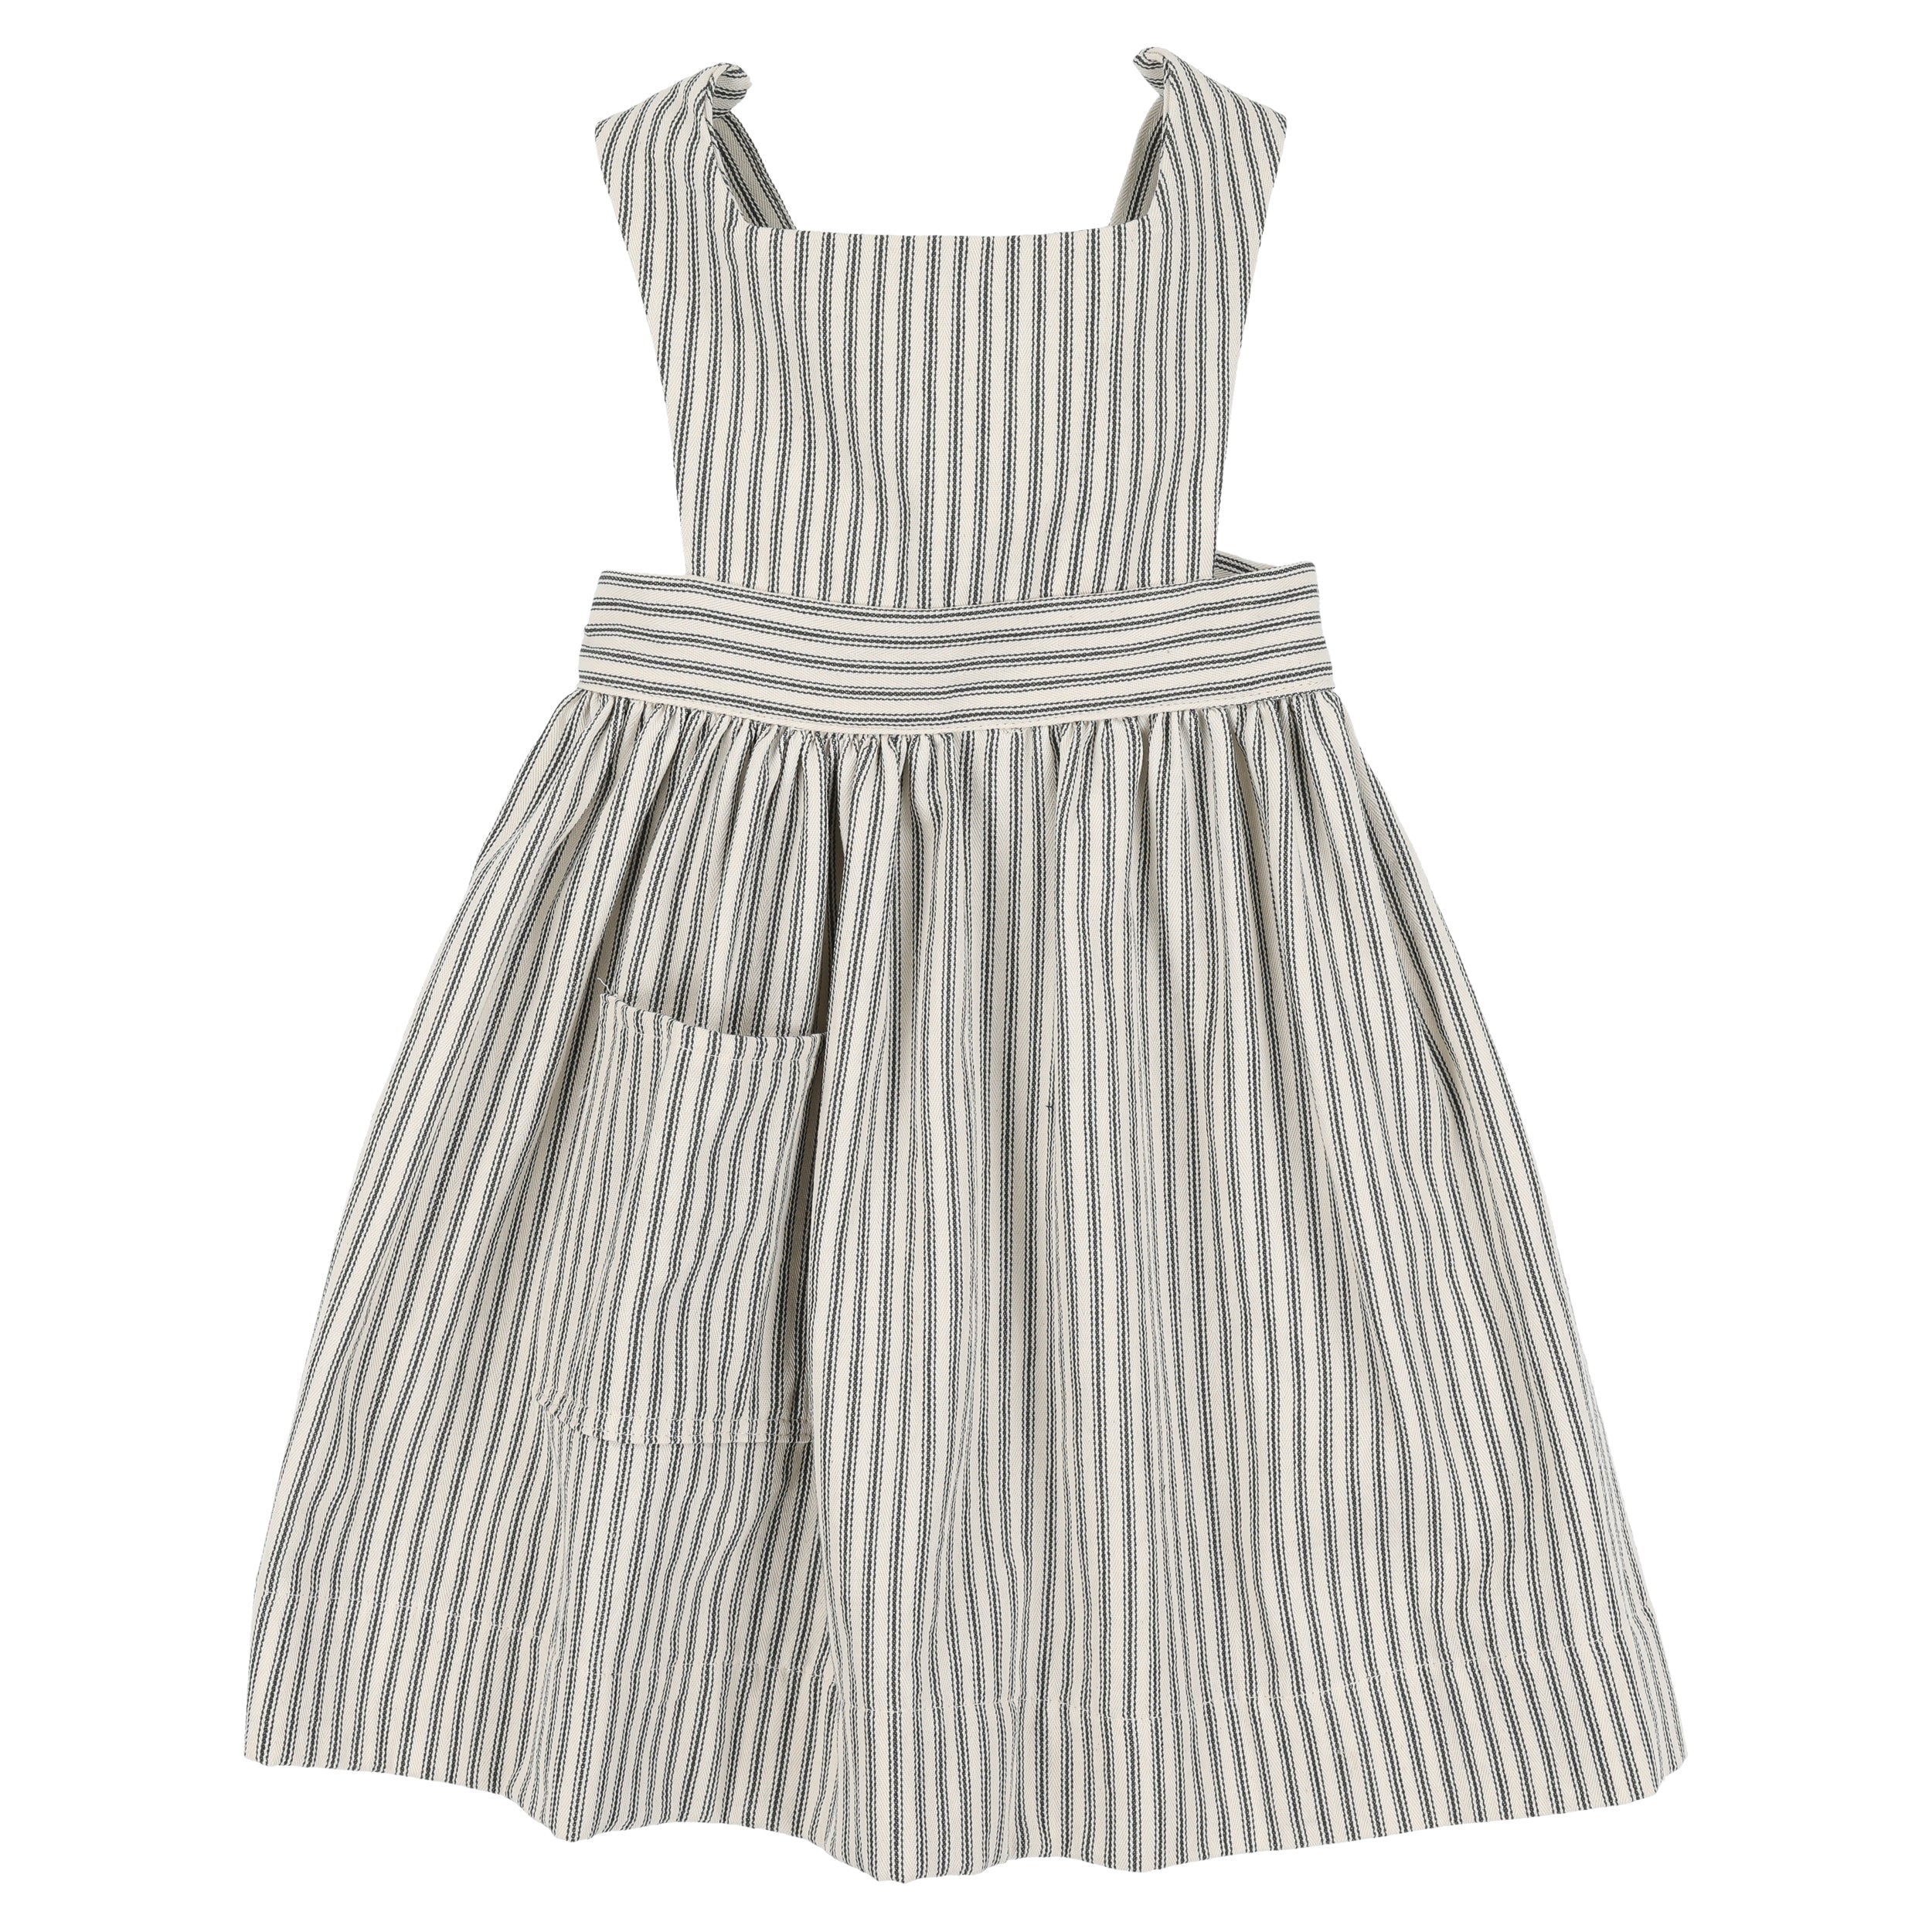 Carrier Company Child's Pinafore in Indigo Ticking